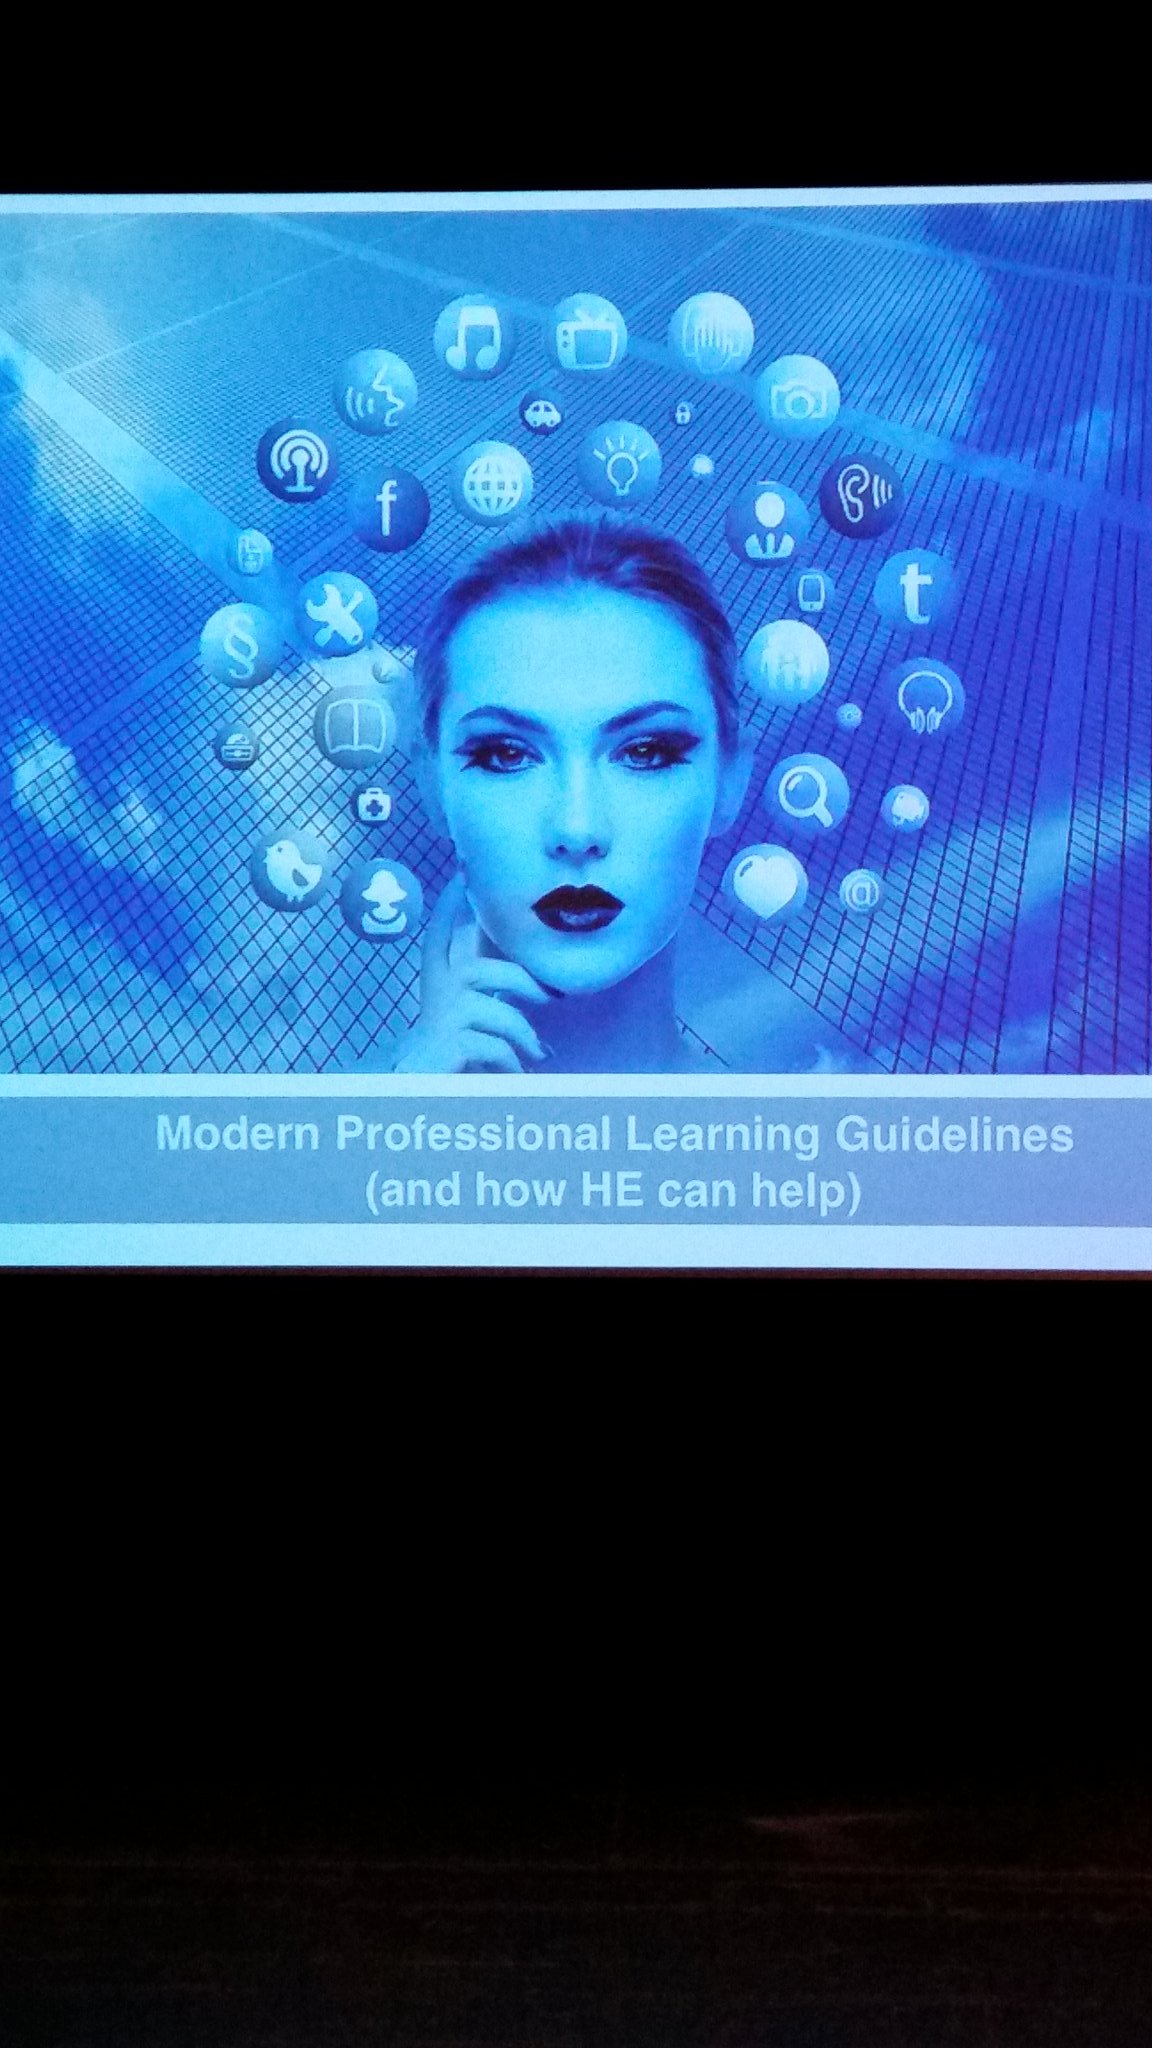 The need to develop our students into modern professional learners in a new digitized environment? #SUSALT17 @SwanseaUni @HumanandHealth https://t.co/xmbXnG58Ww